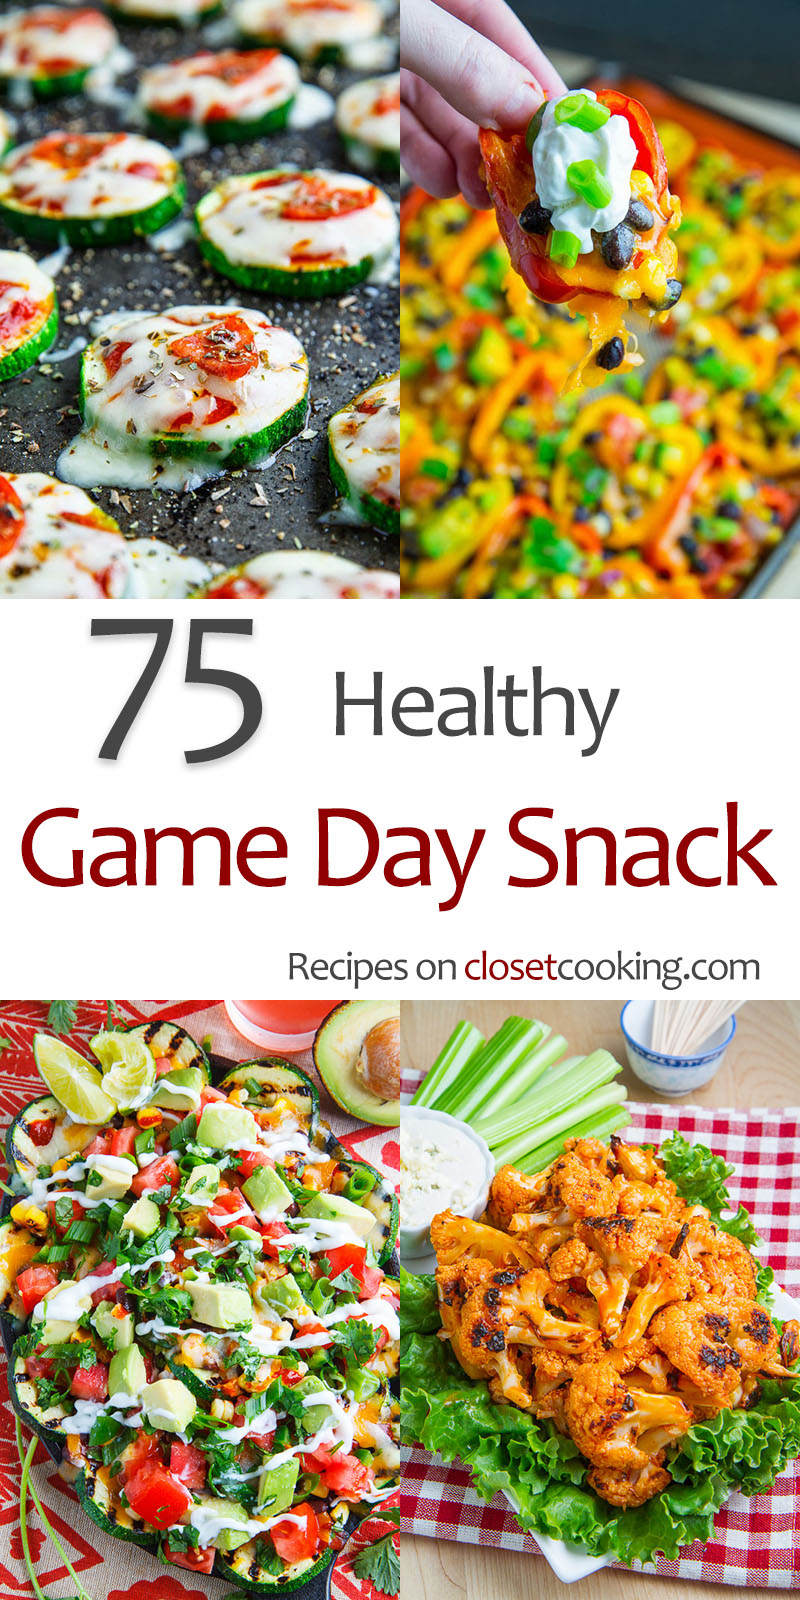 Fun Game Day Appetizers and Party Food